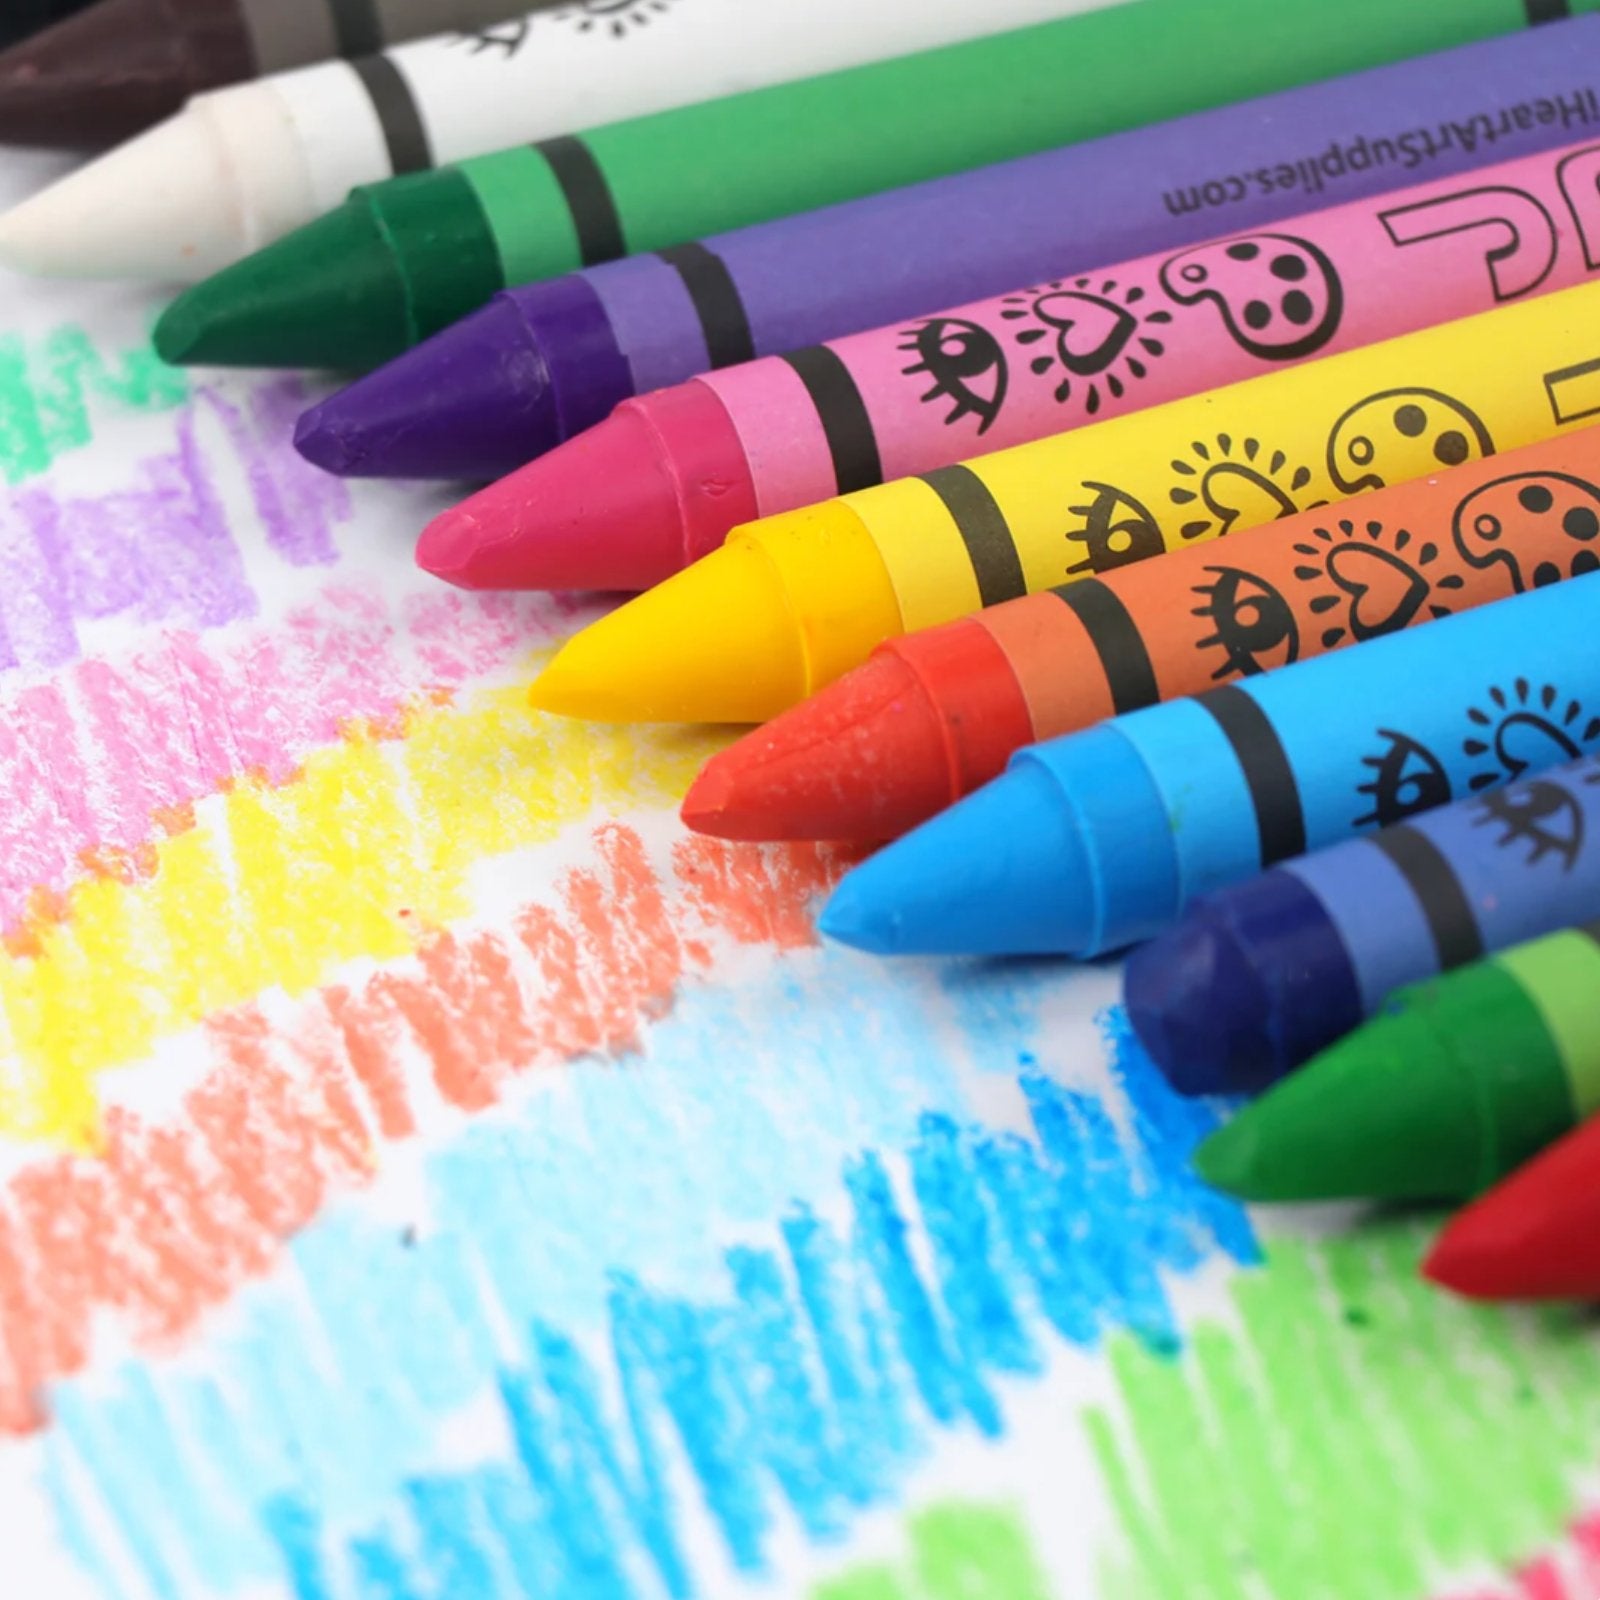 Funny crayons Stock Photos, Royalty Free Funny crayons Images